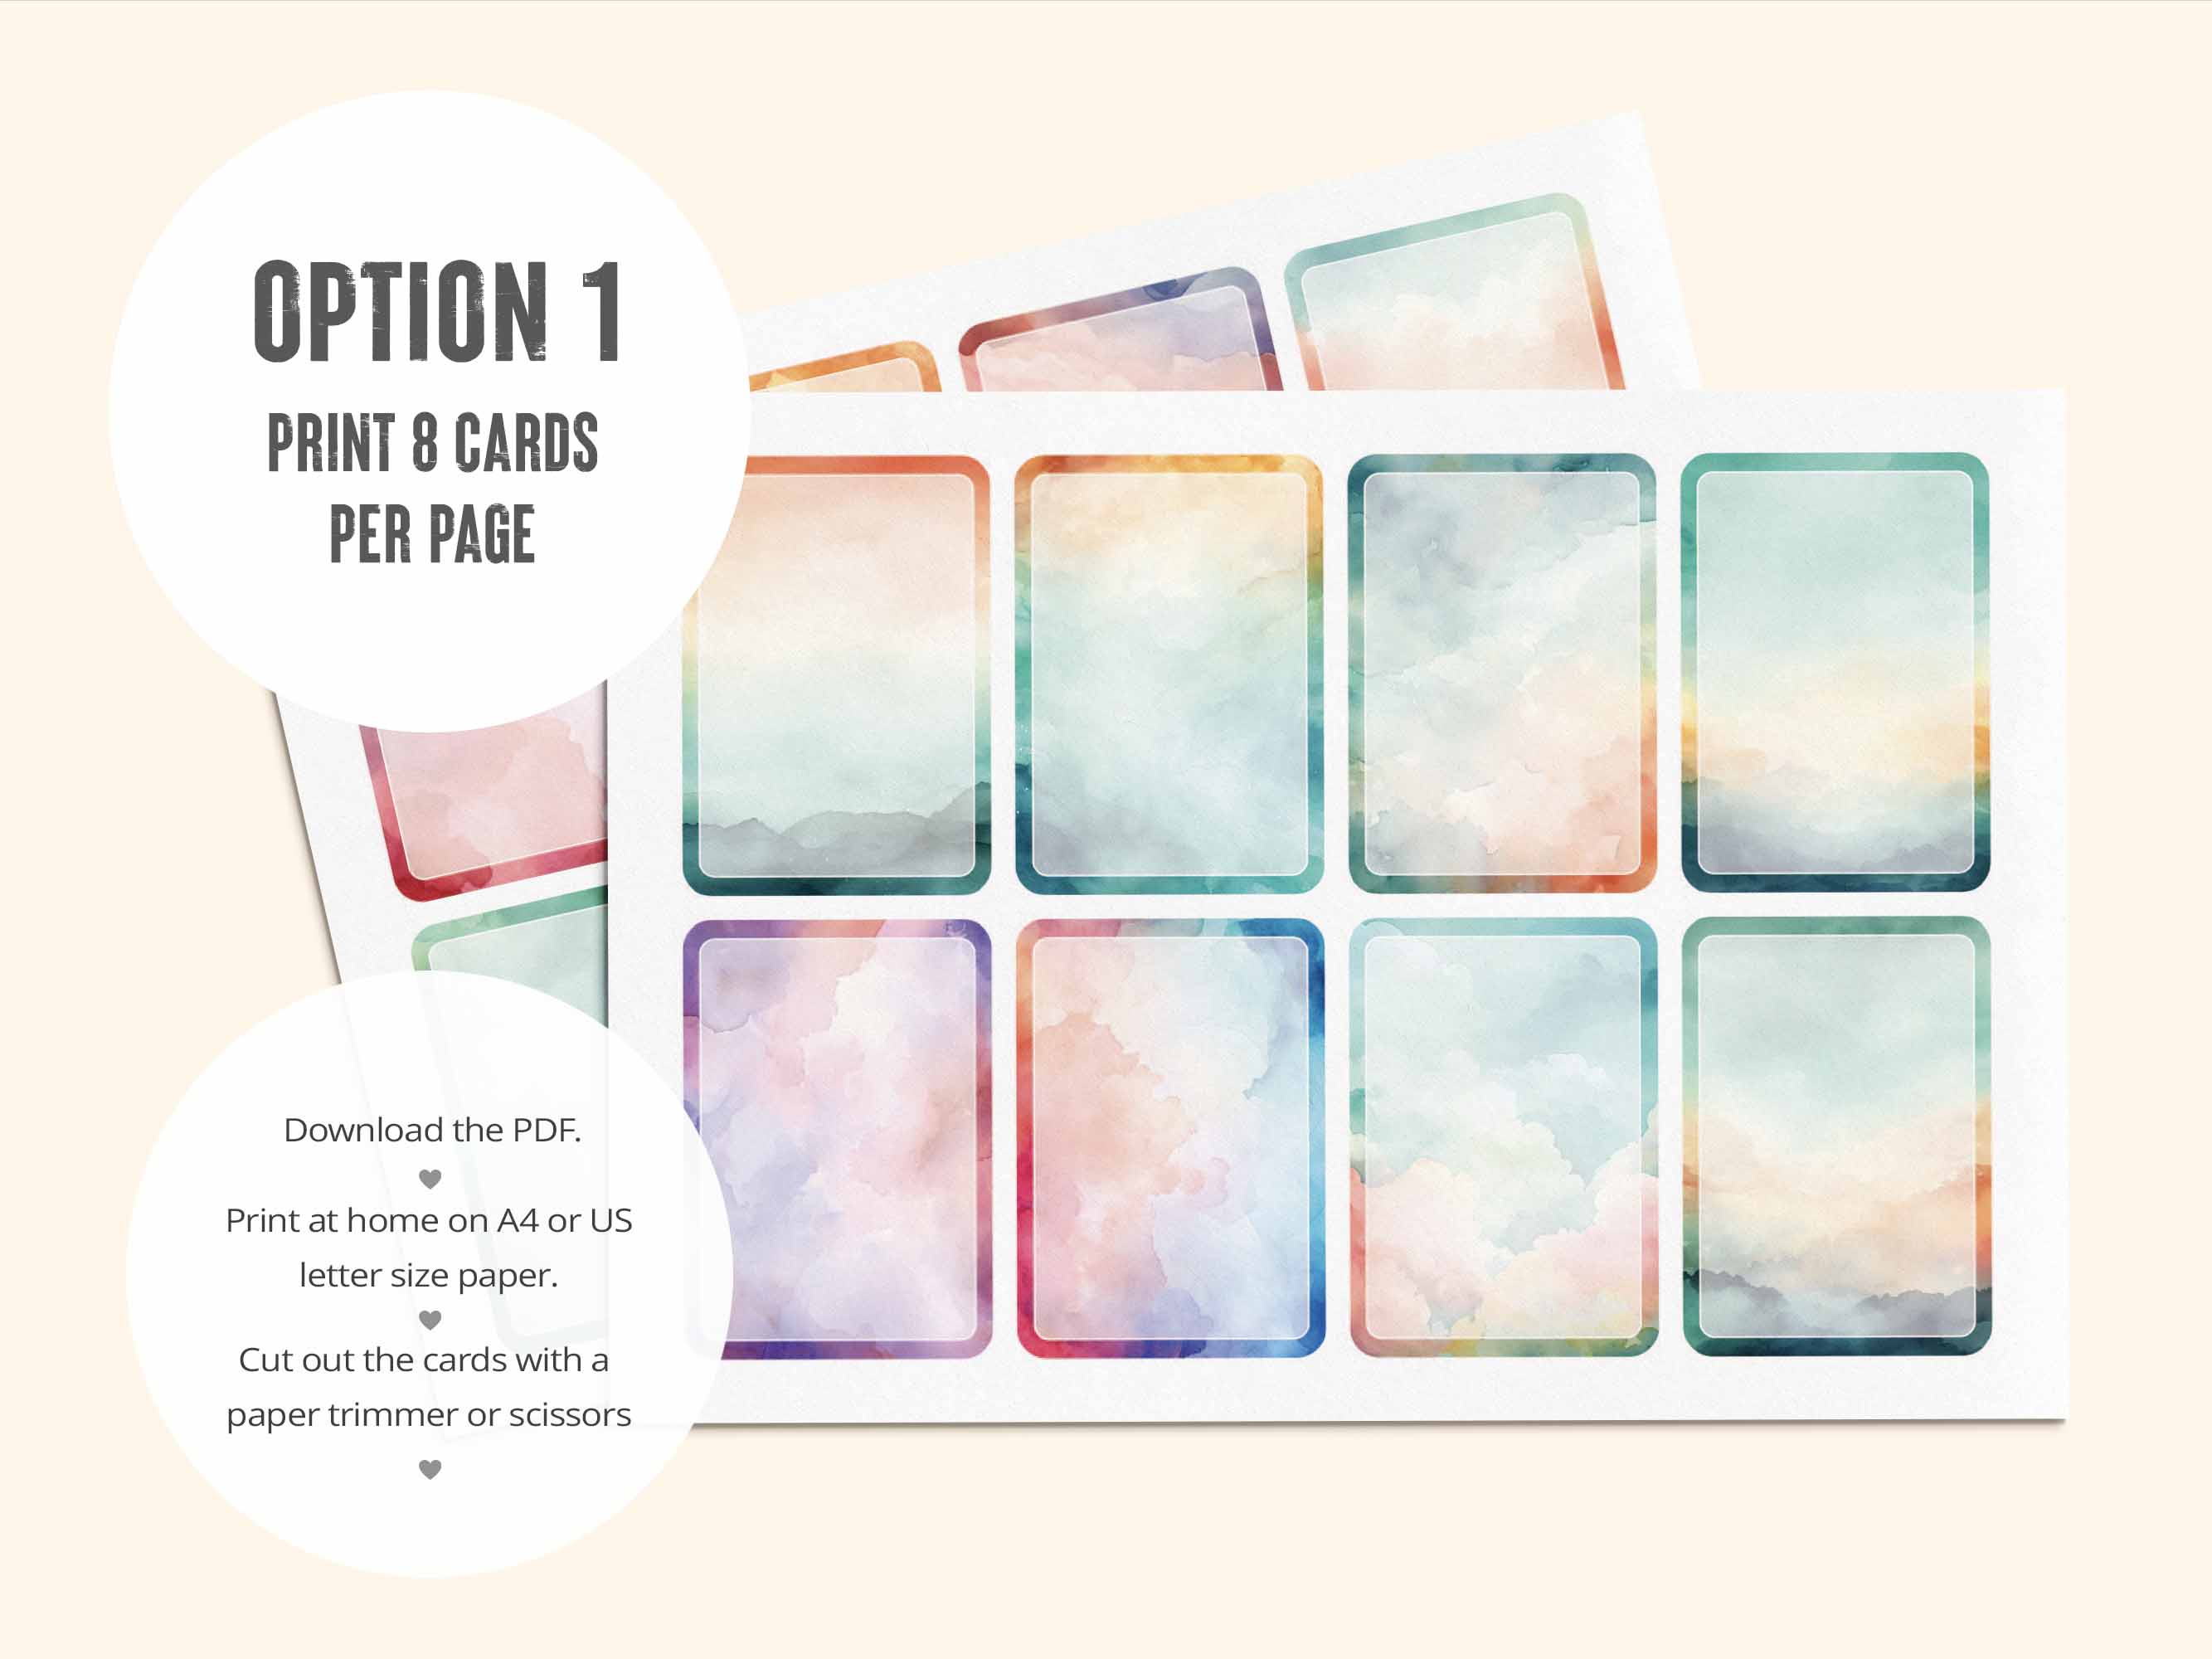 The first PDF has all 16 blank watercolor affirmation cards laid out 8 per page.